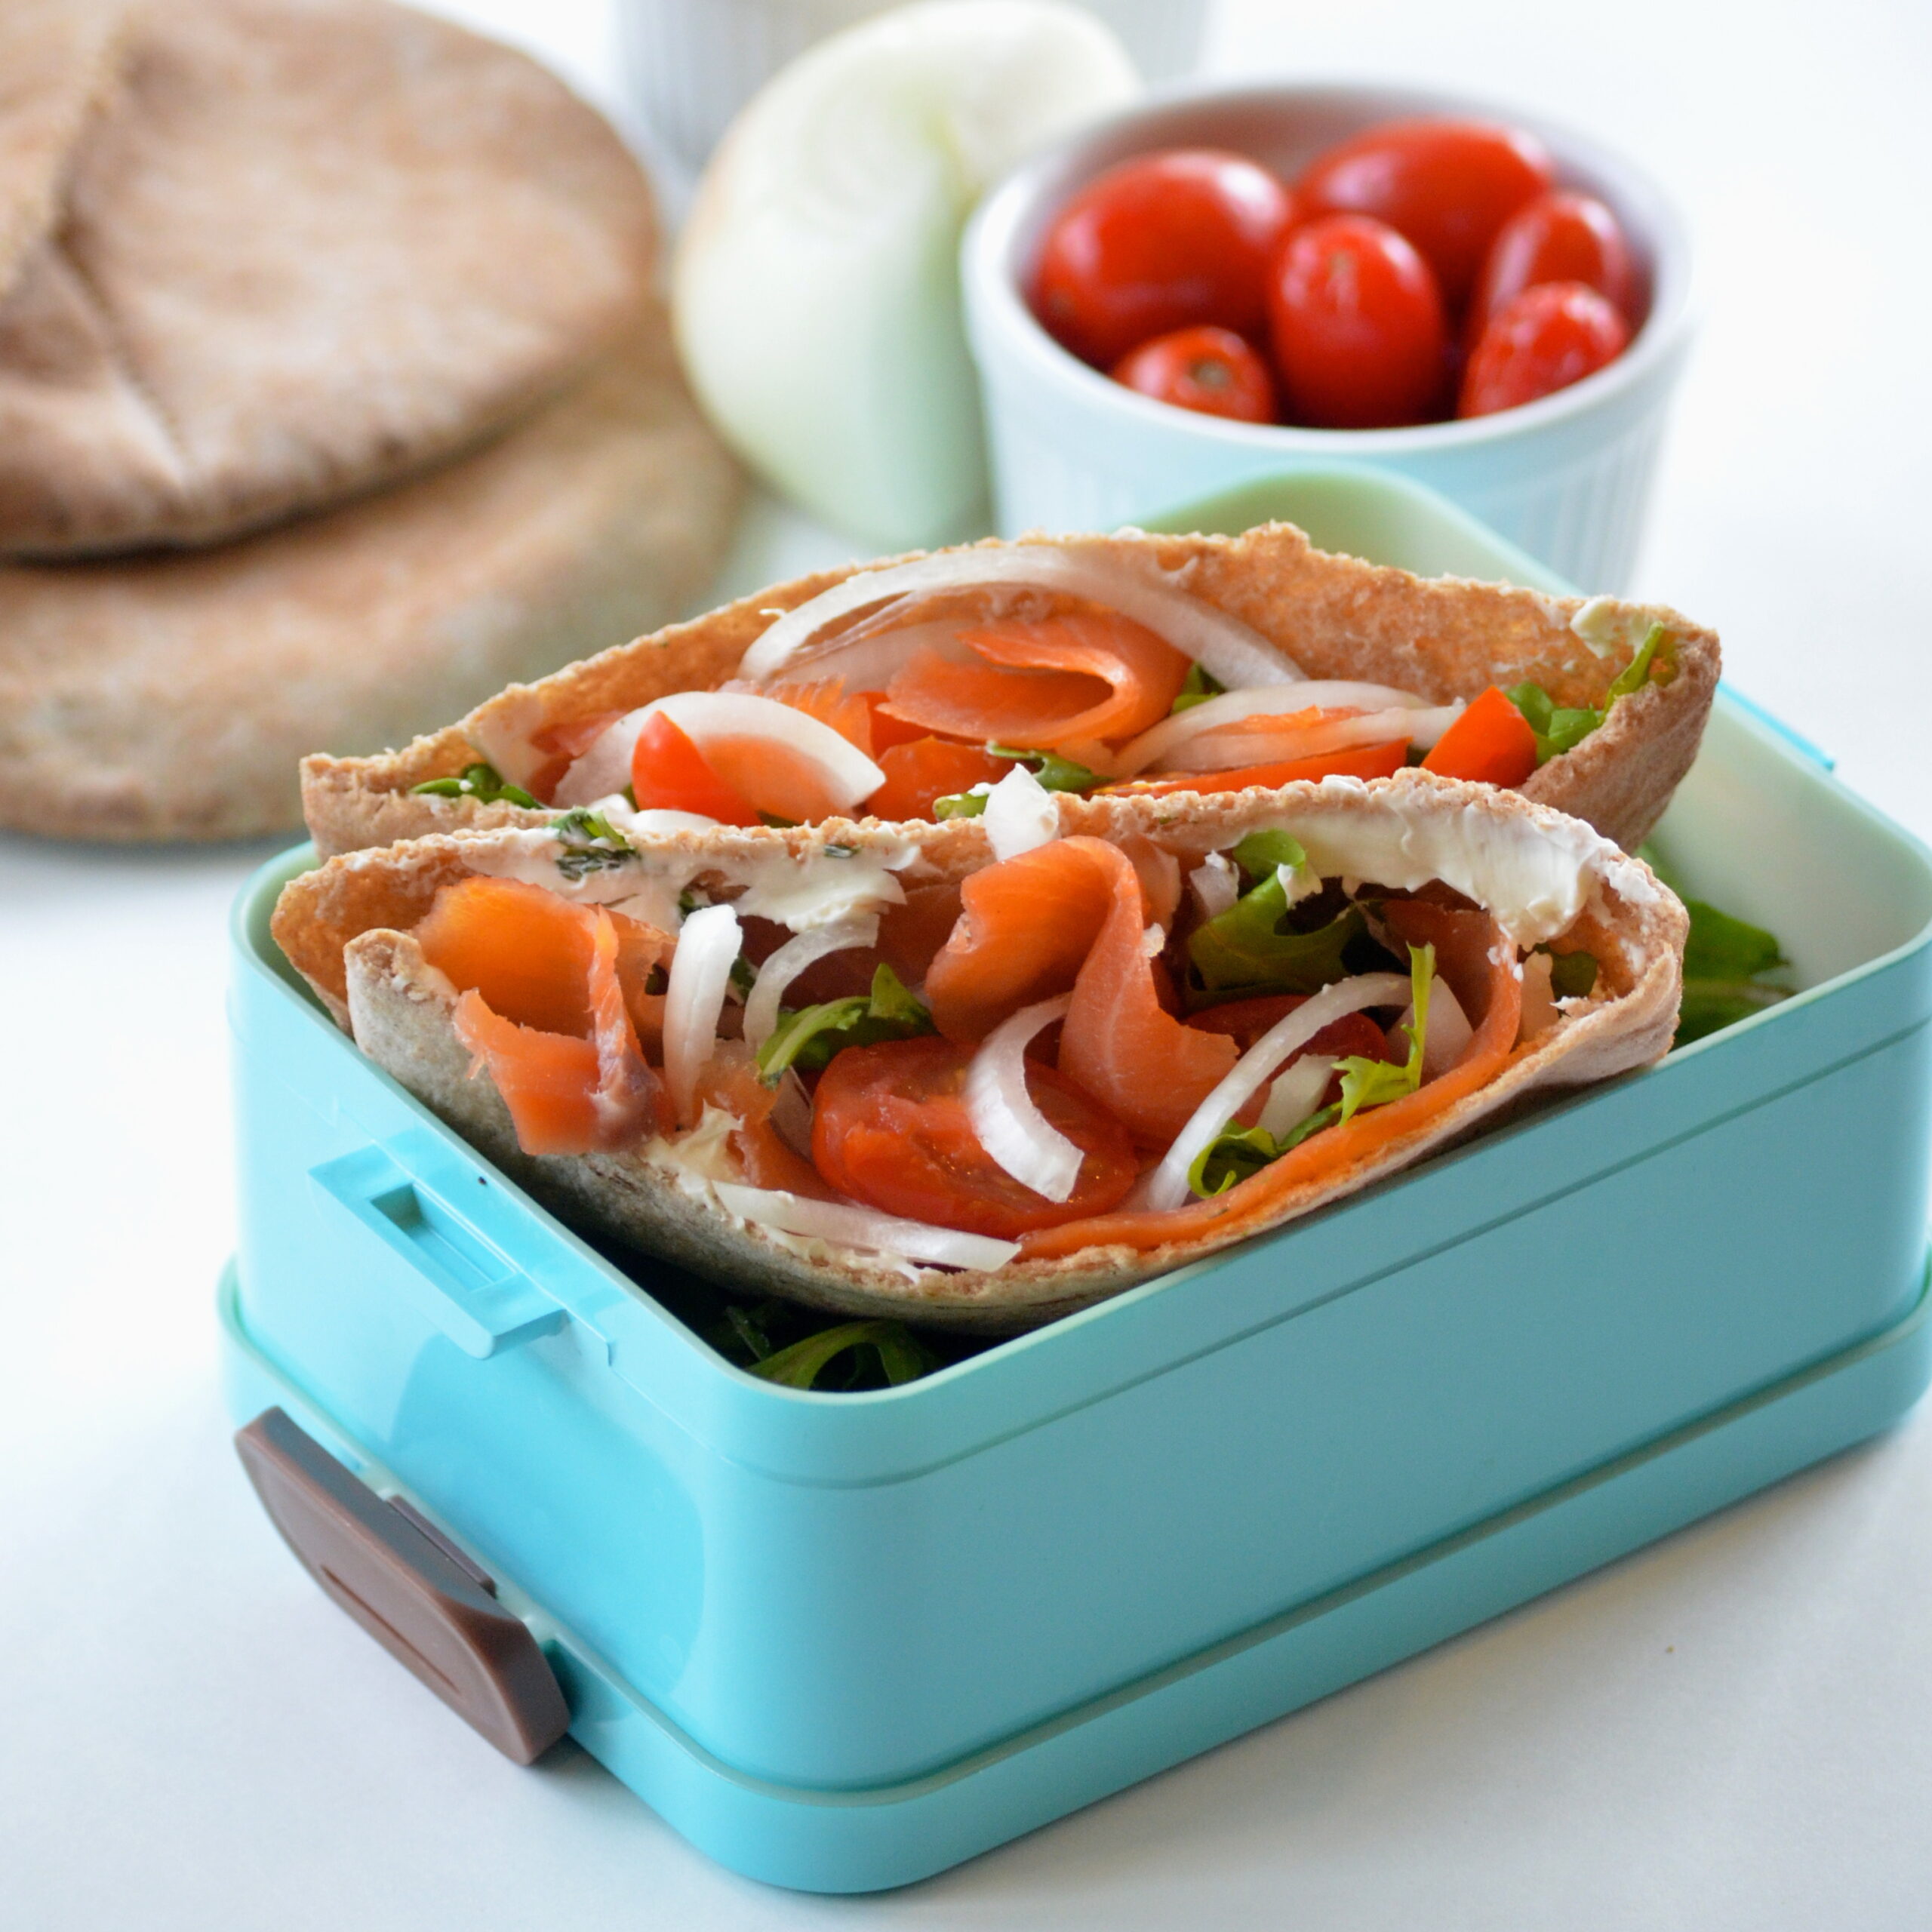 Smoked salmon pita sandwiches a quick healthy and delicious lunch1